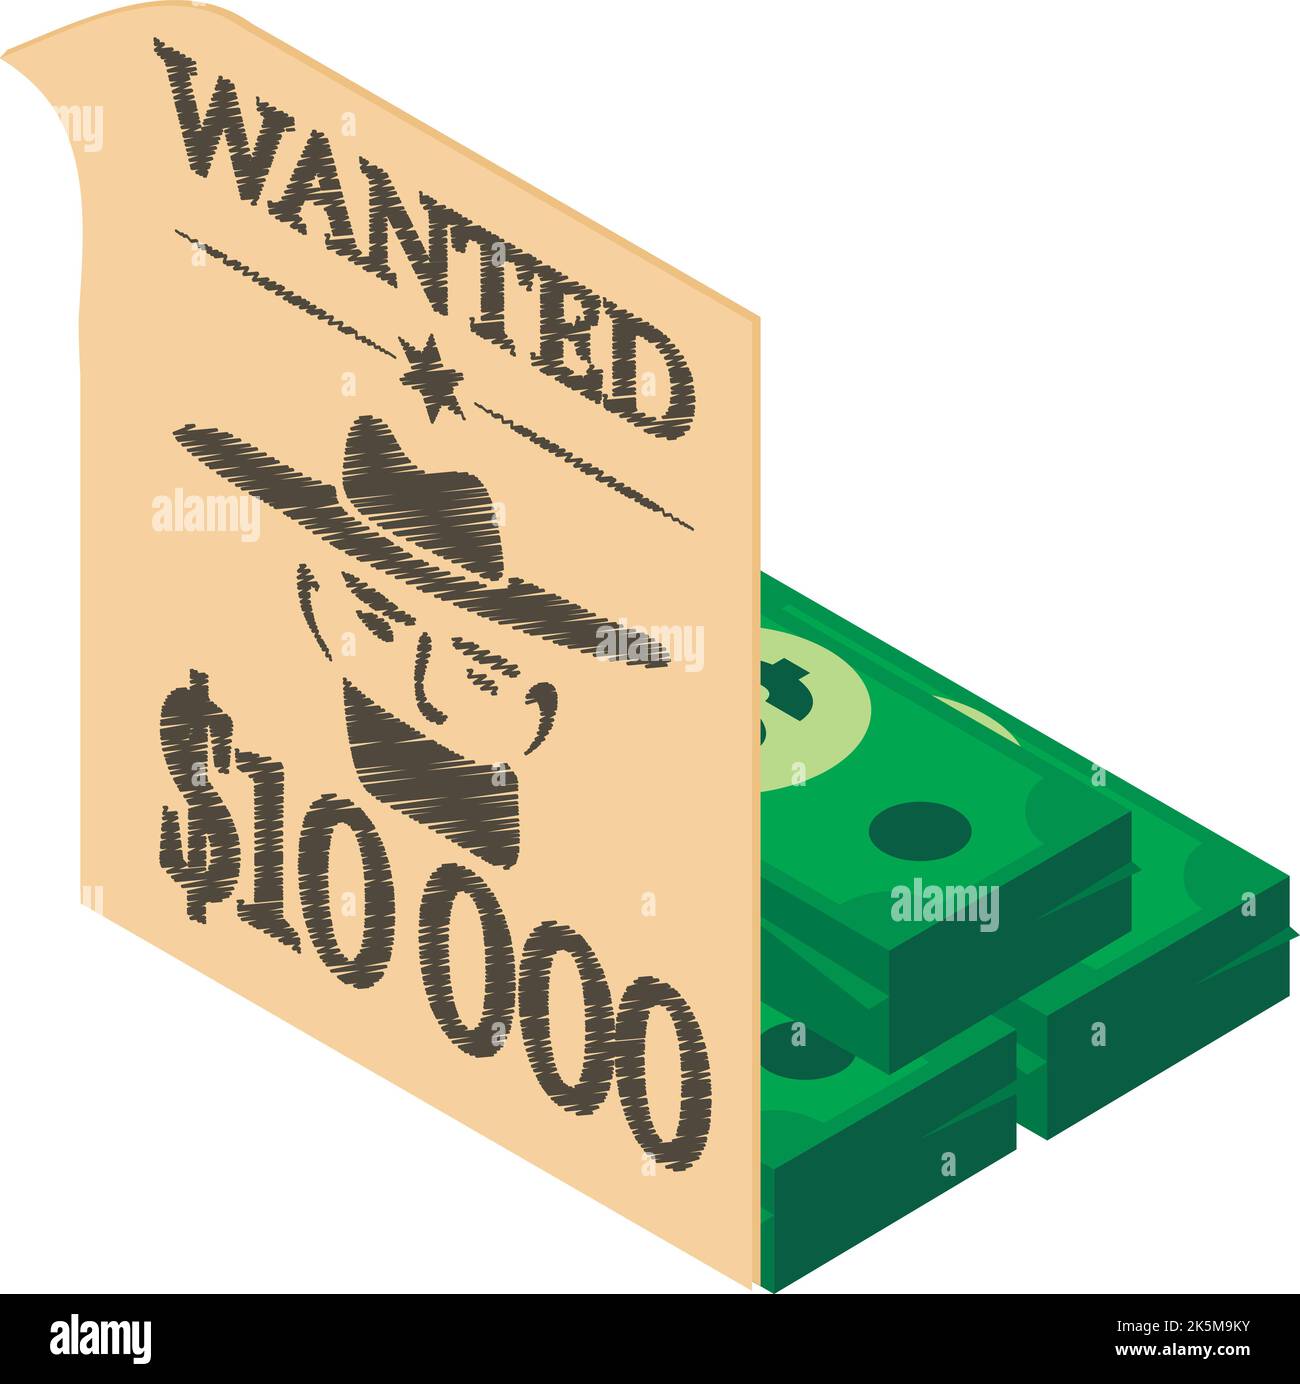 Wild west icon isometric vector. Wanted poster and stack of dollar banknote icon. Texas wild west, western Stock Vector